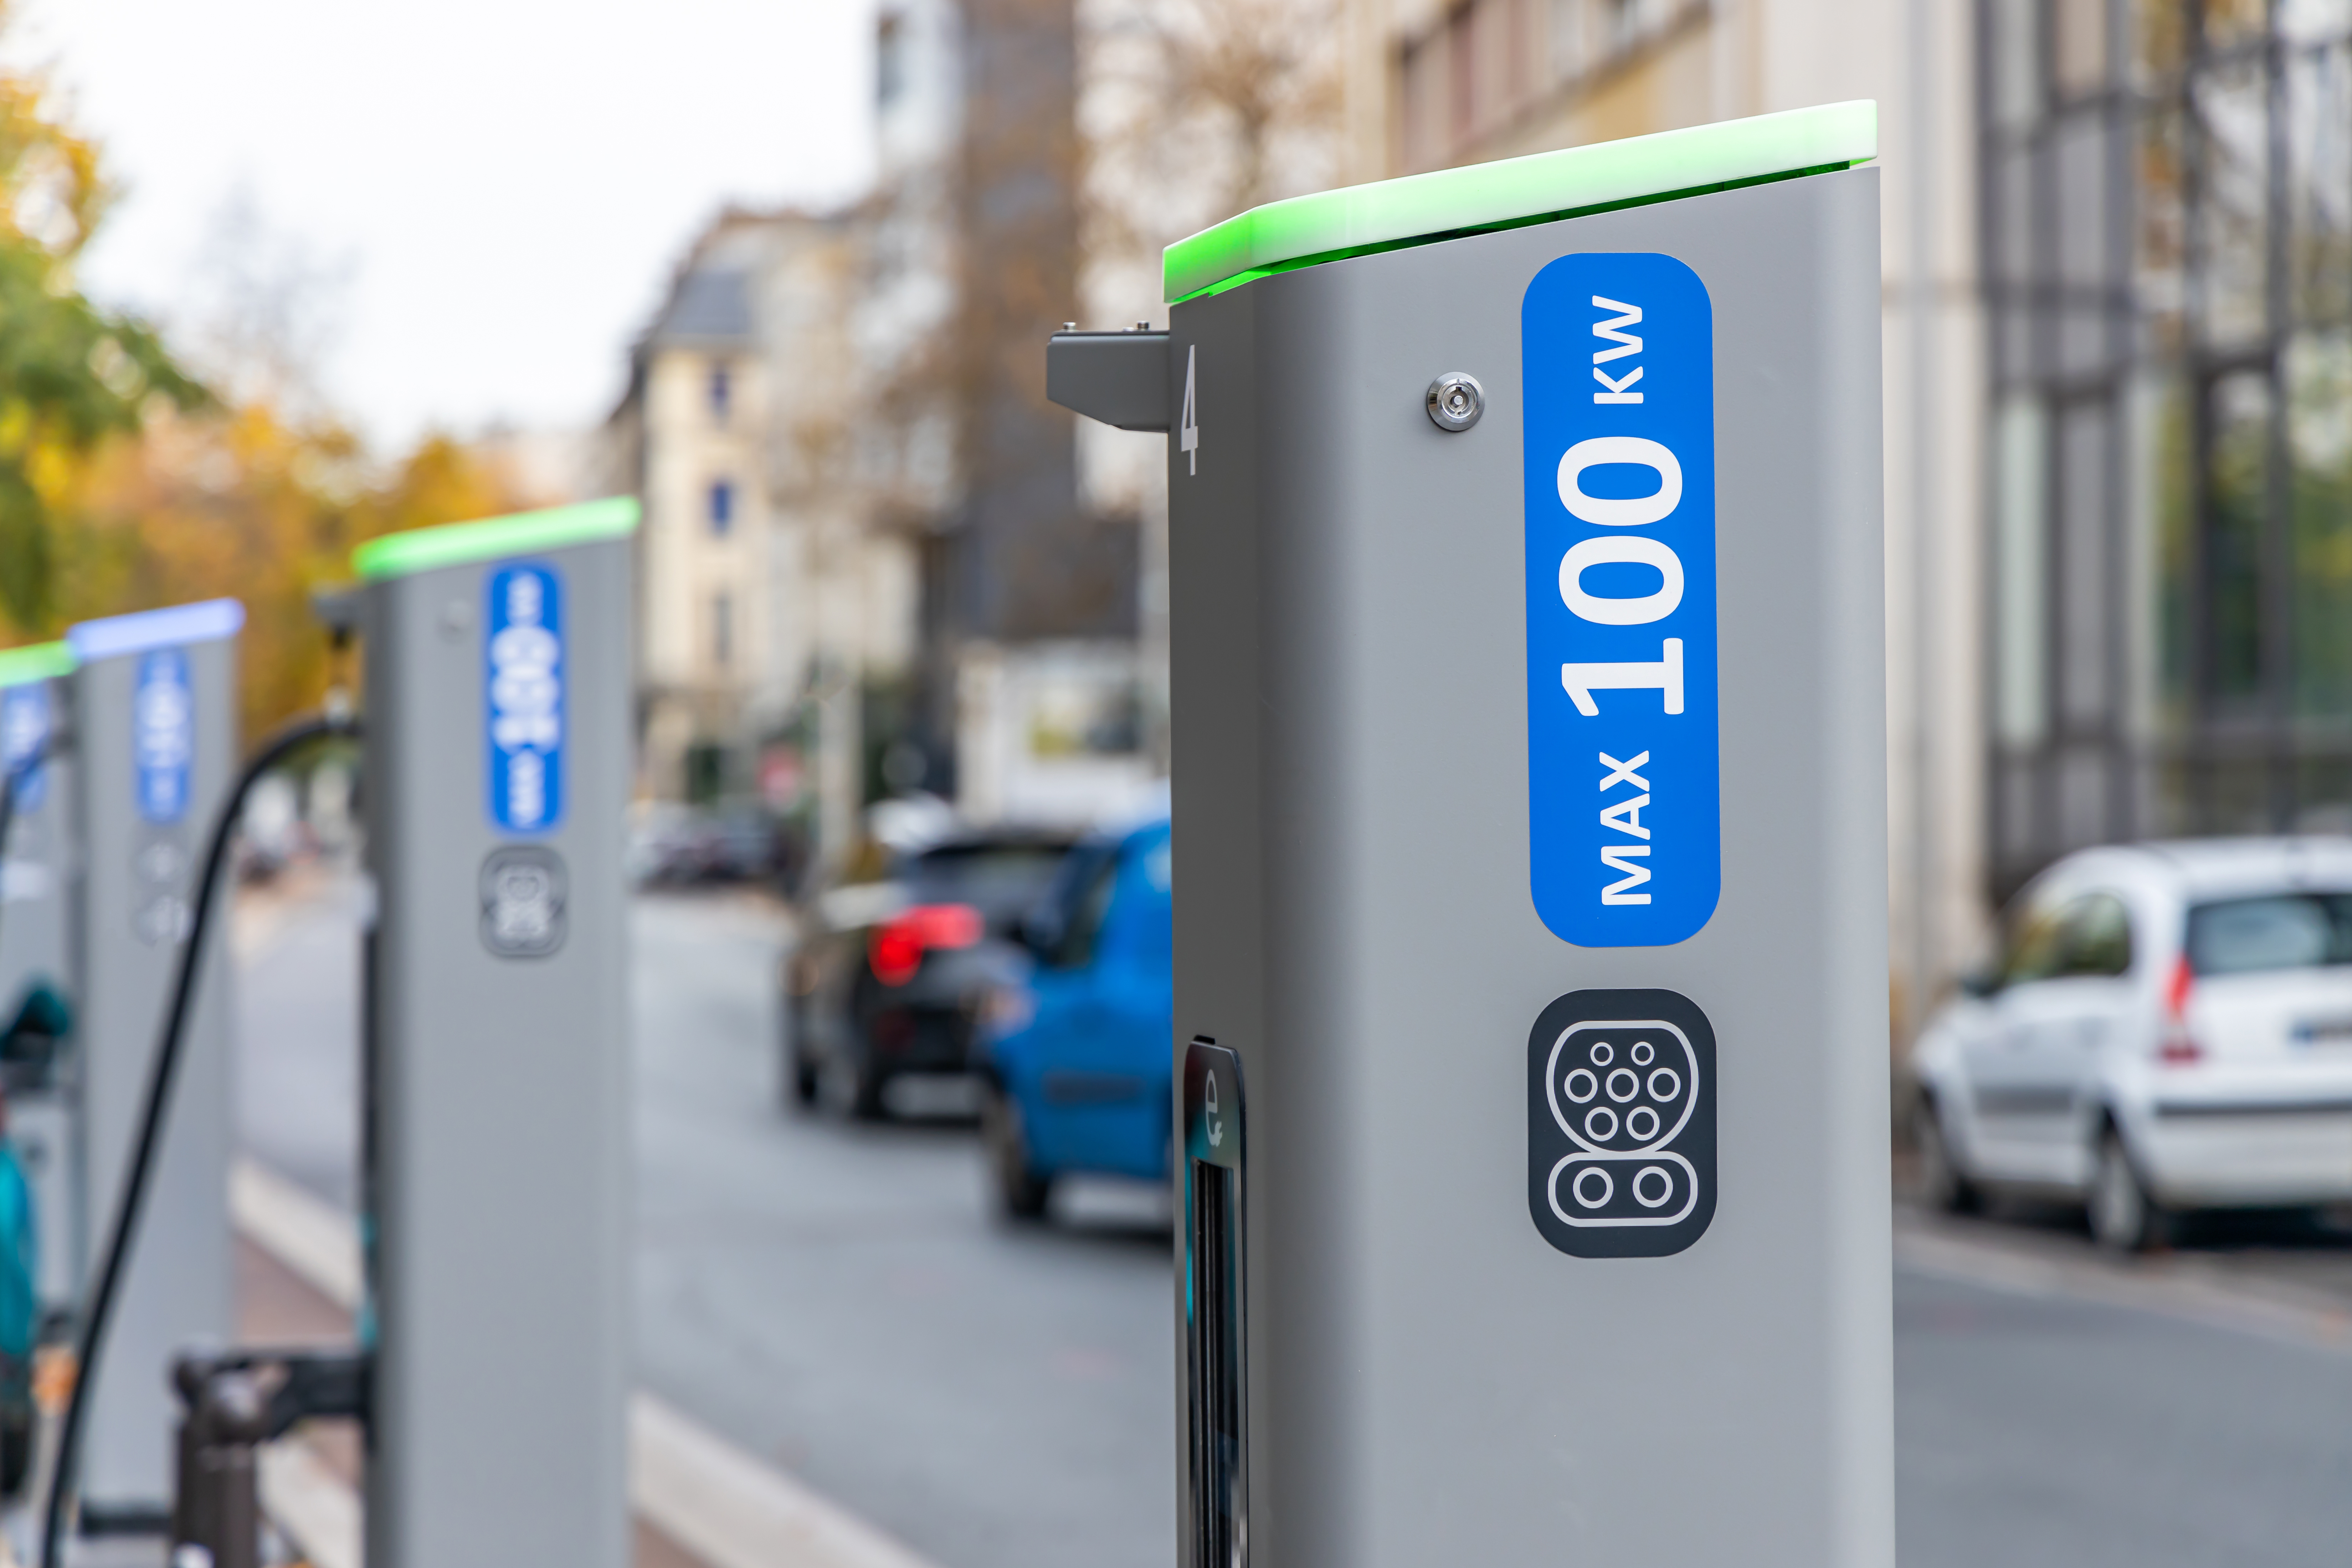 Do Universal Electric Car Charging Stations Exist?